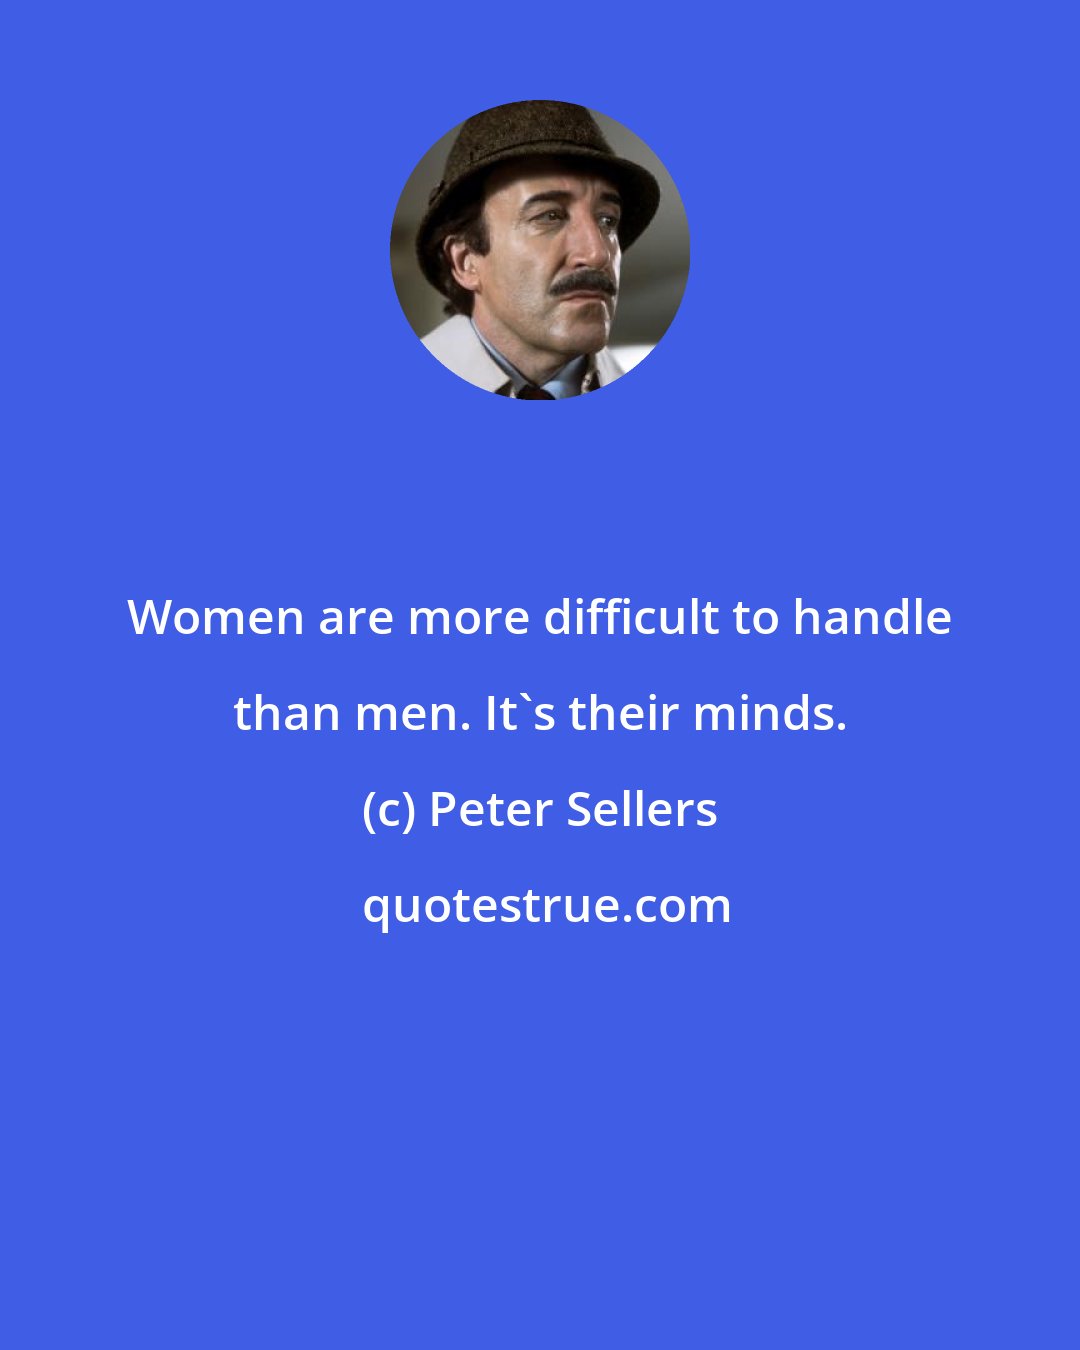 Peter Sellers: Women are more difficult to handle than men. It's their minds.